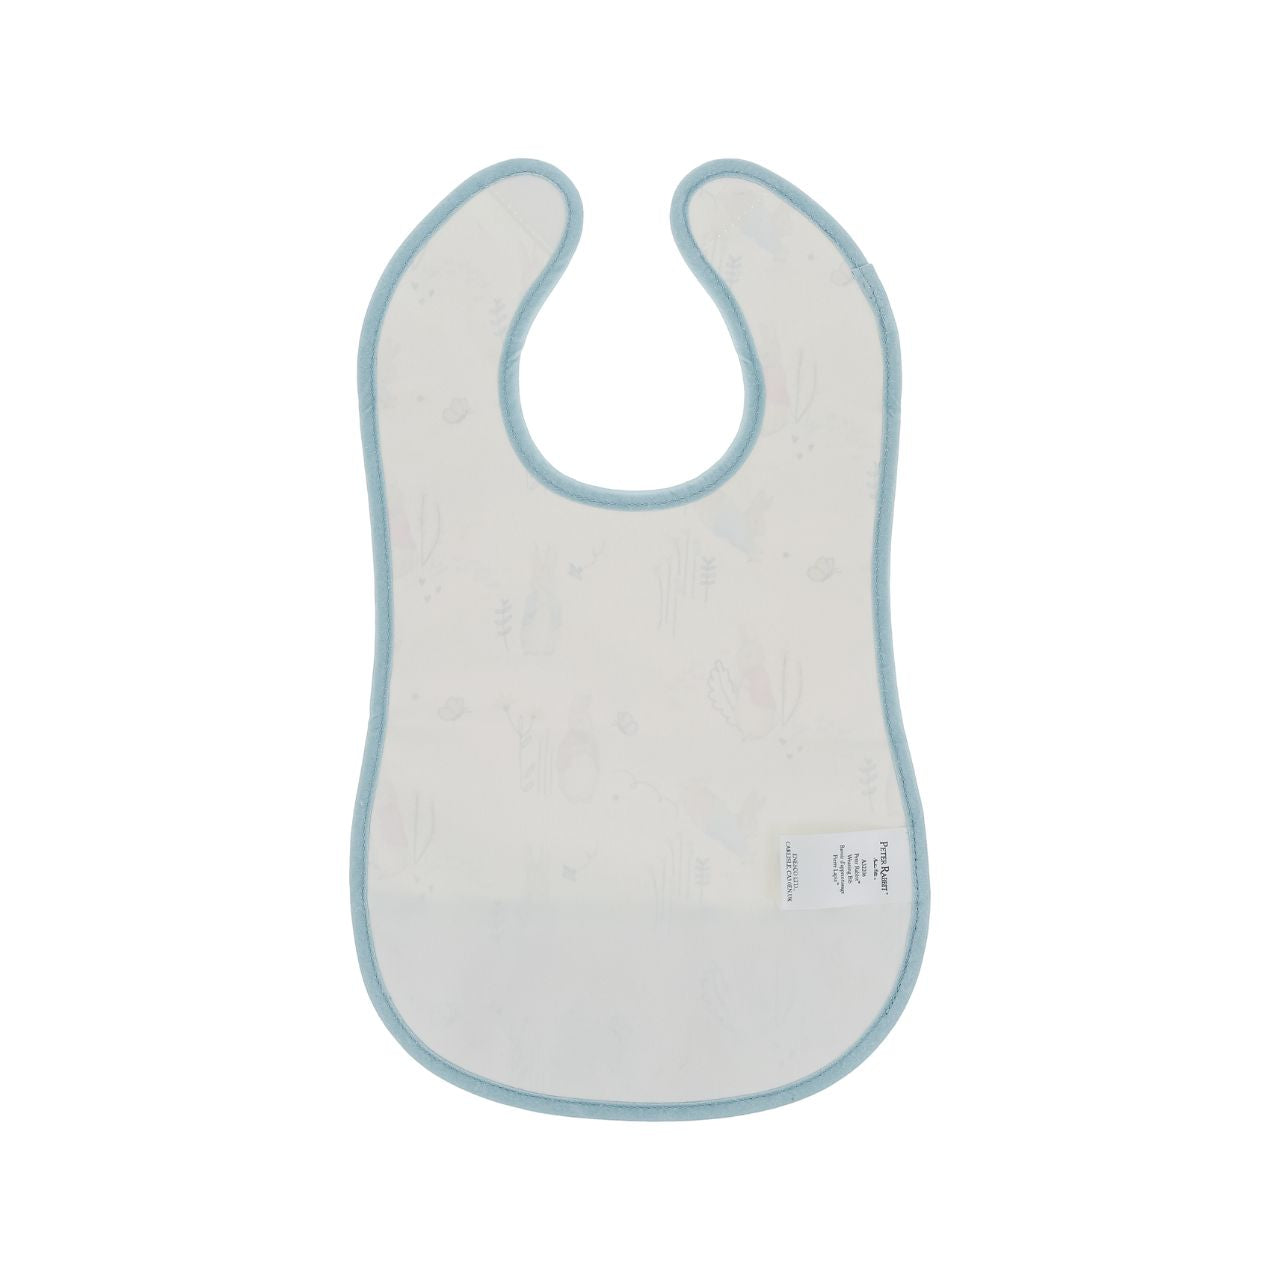 The Peter Rabbit Weaning Bib combines adorable design with a practical and durable protective product. Featuring a design based on the original Beatrix Potter illustrations, wipe-clean material and easy-peasy fastenings, we've got mealtimes, and baby, covered.